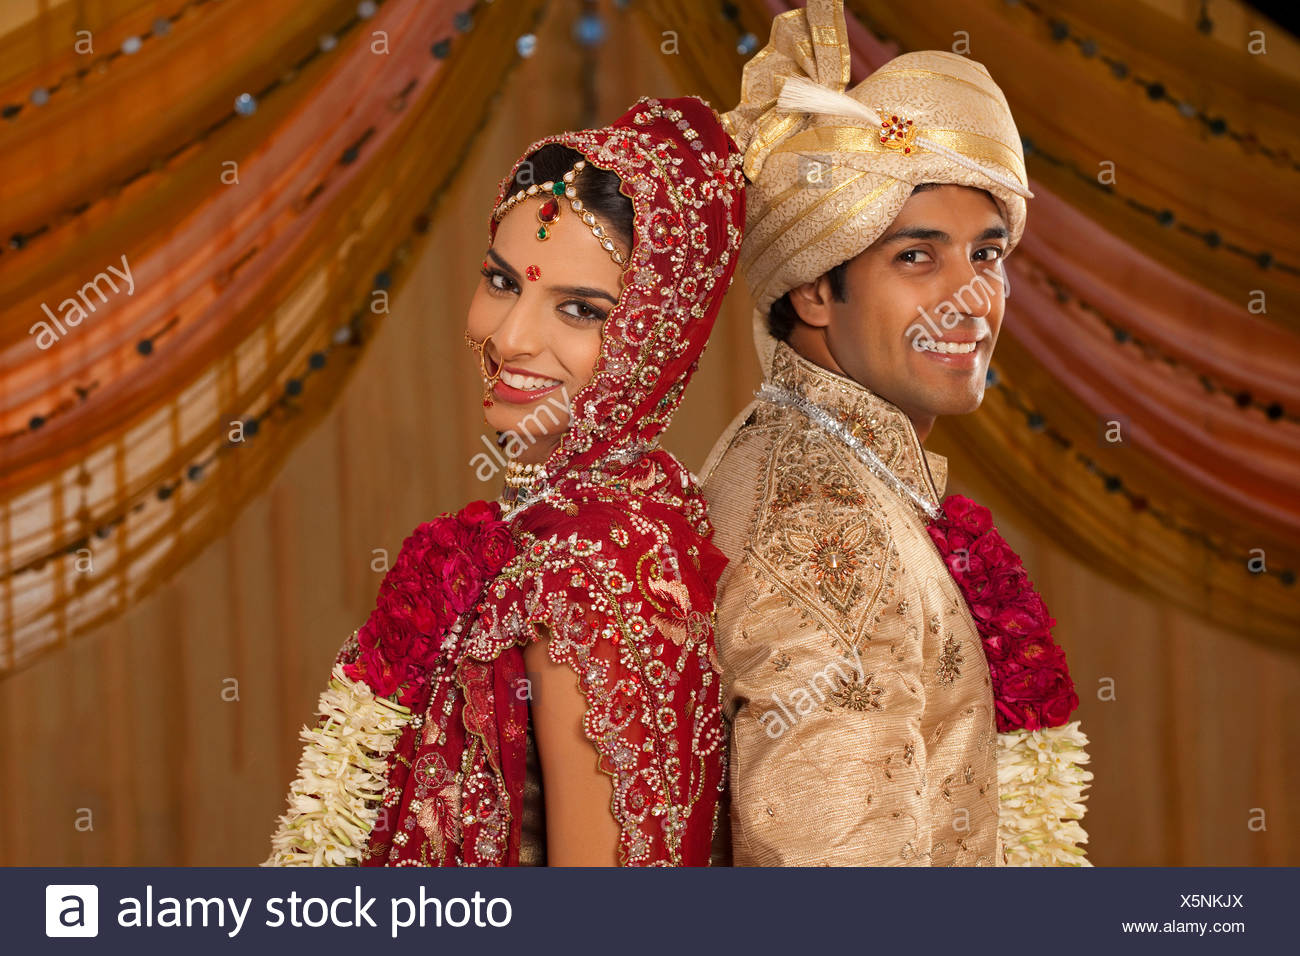 Portrait Of Newly Married Indian Couple Stock Photo 278915586